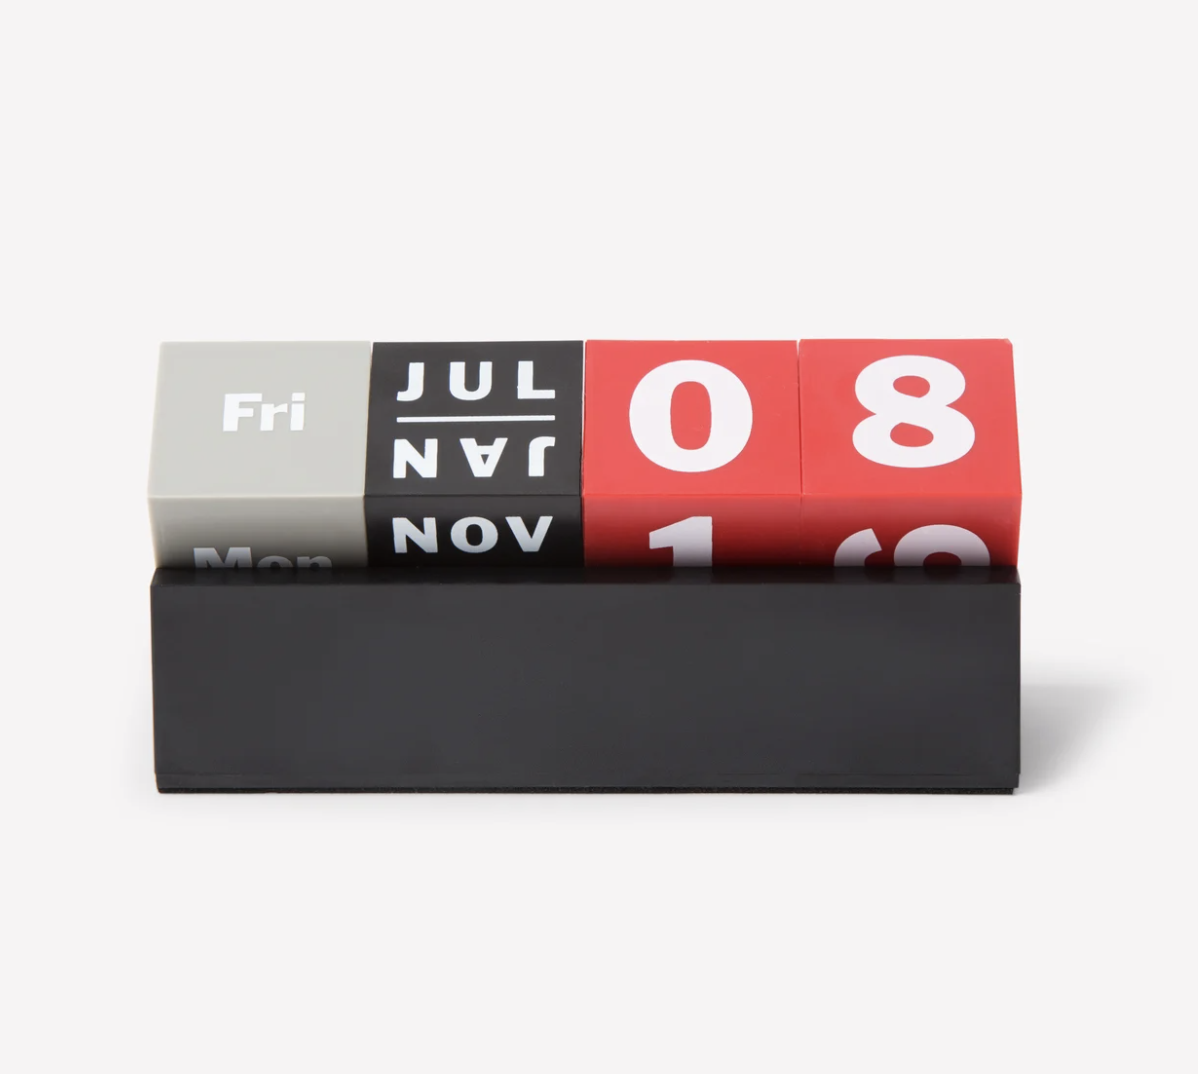 Daily calendar featuring four blocks with the day of the week, month, and day